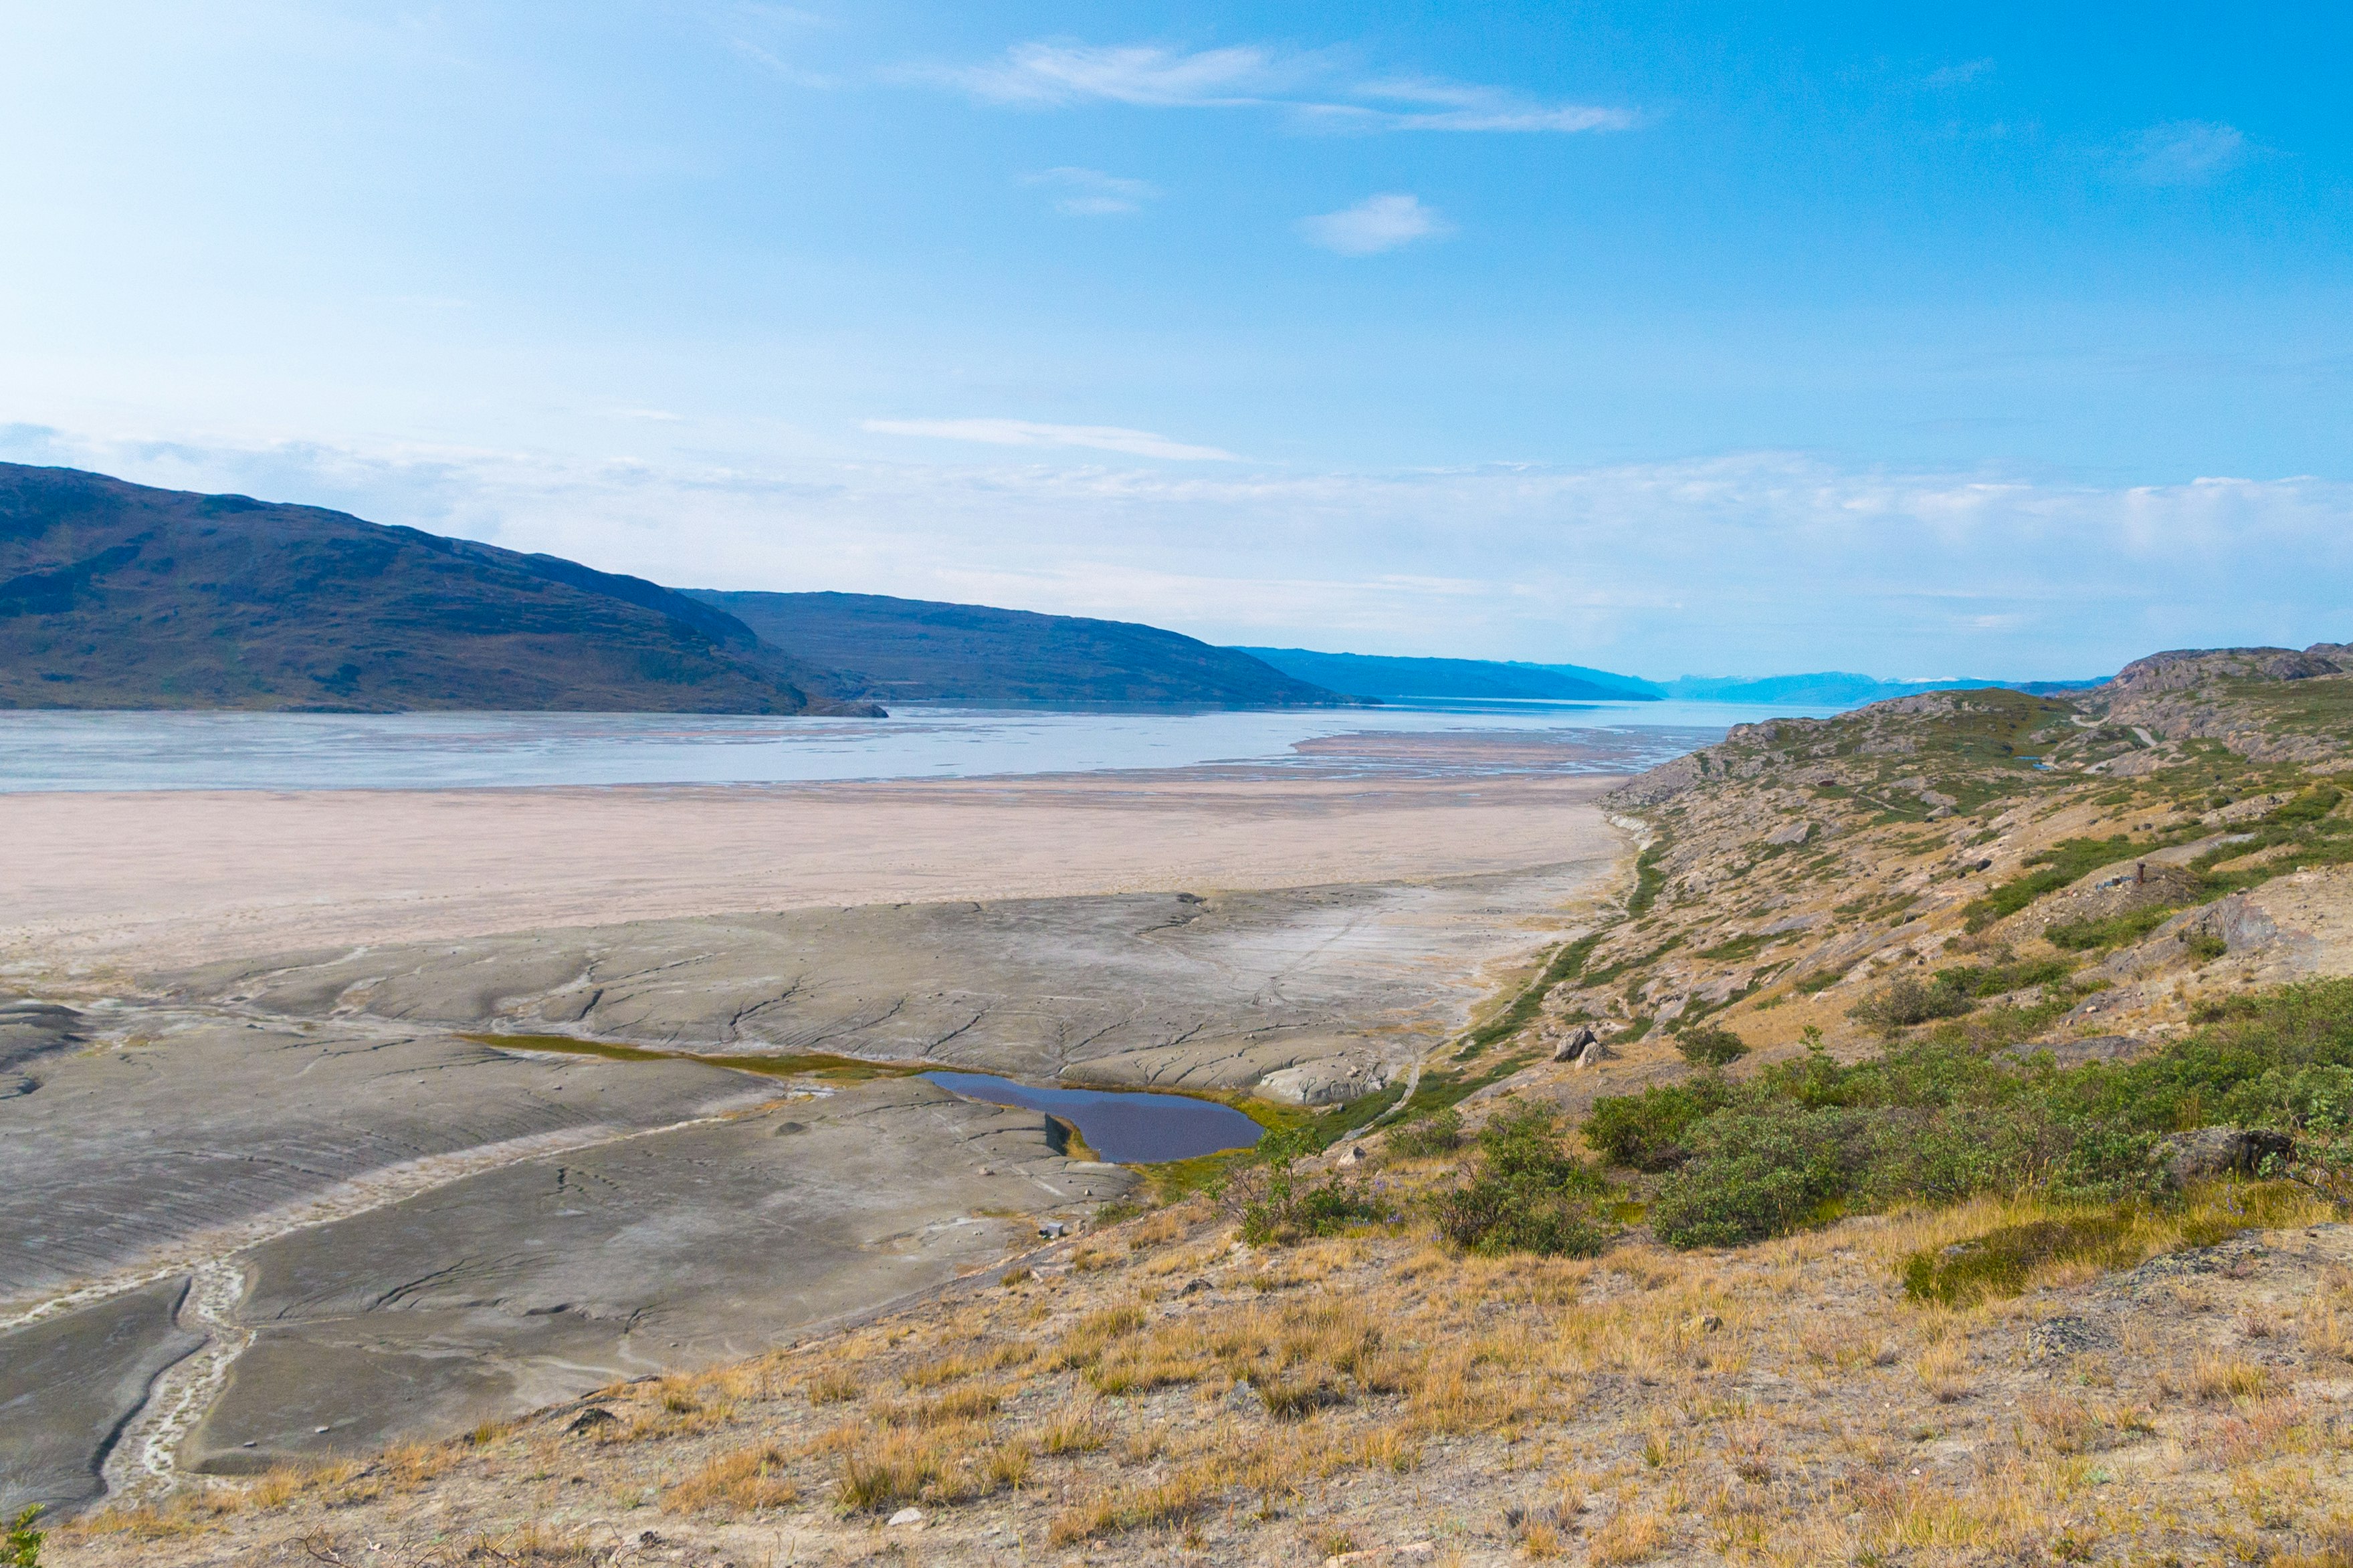 A view over a sandy beach to the waters of Kangerlussuaq fjord, with gently slopping slopes on the opposite side